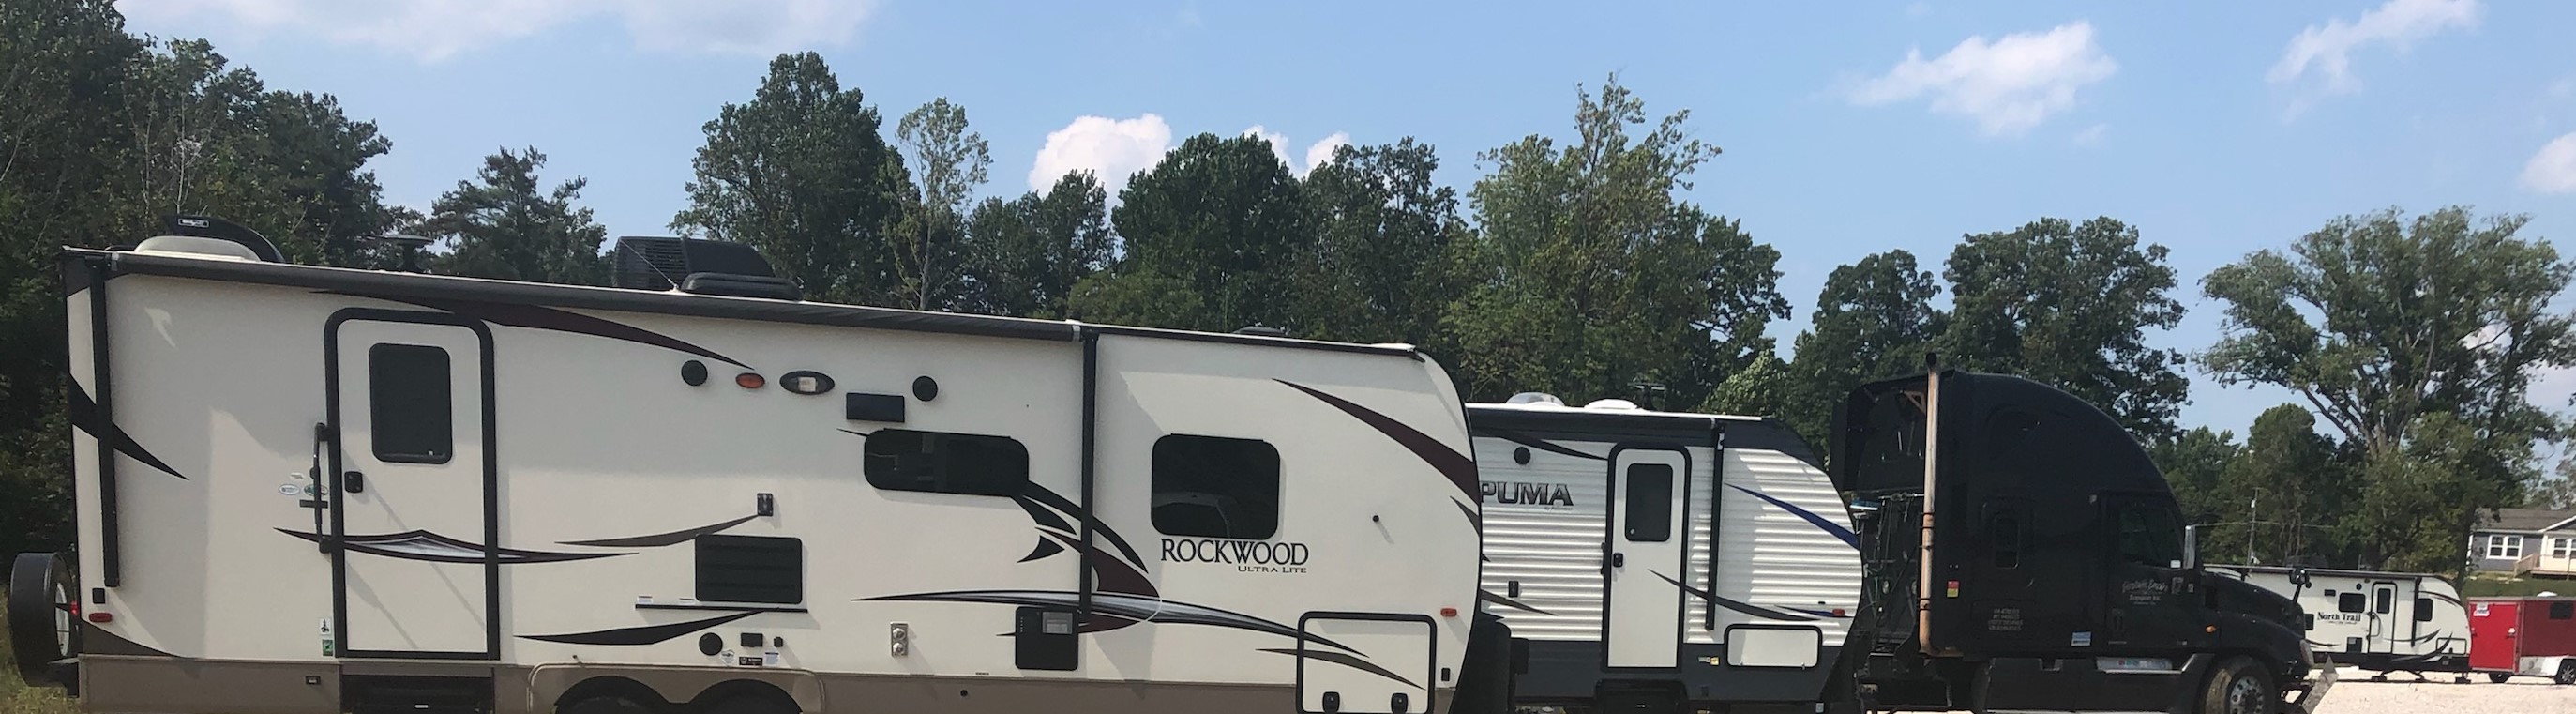 Spacious boat and RV parking area at Corydon Access Storage, offering secure and convenient outdoor storage options.